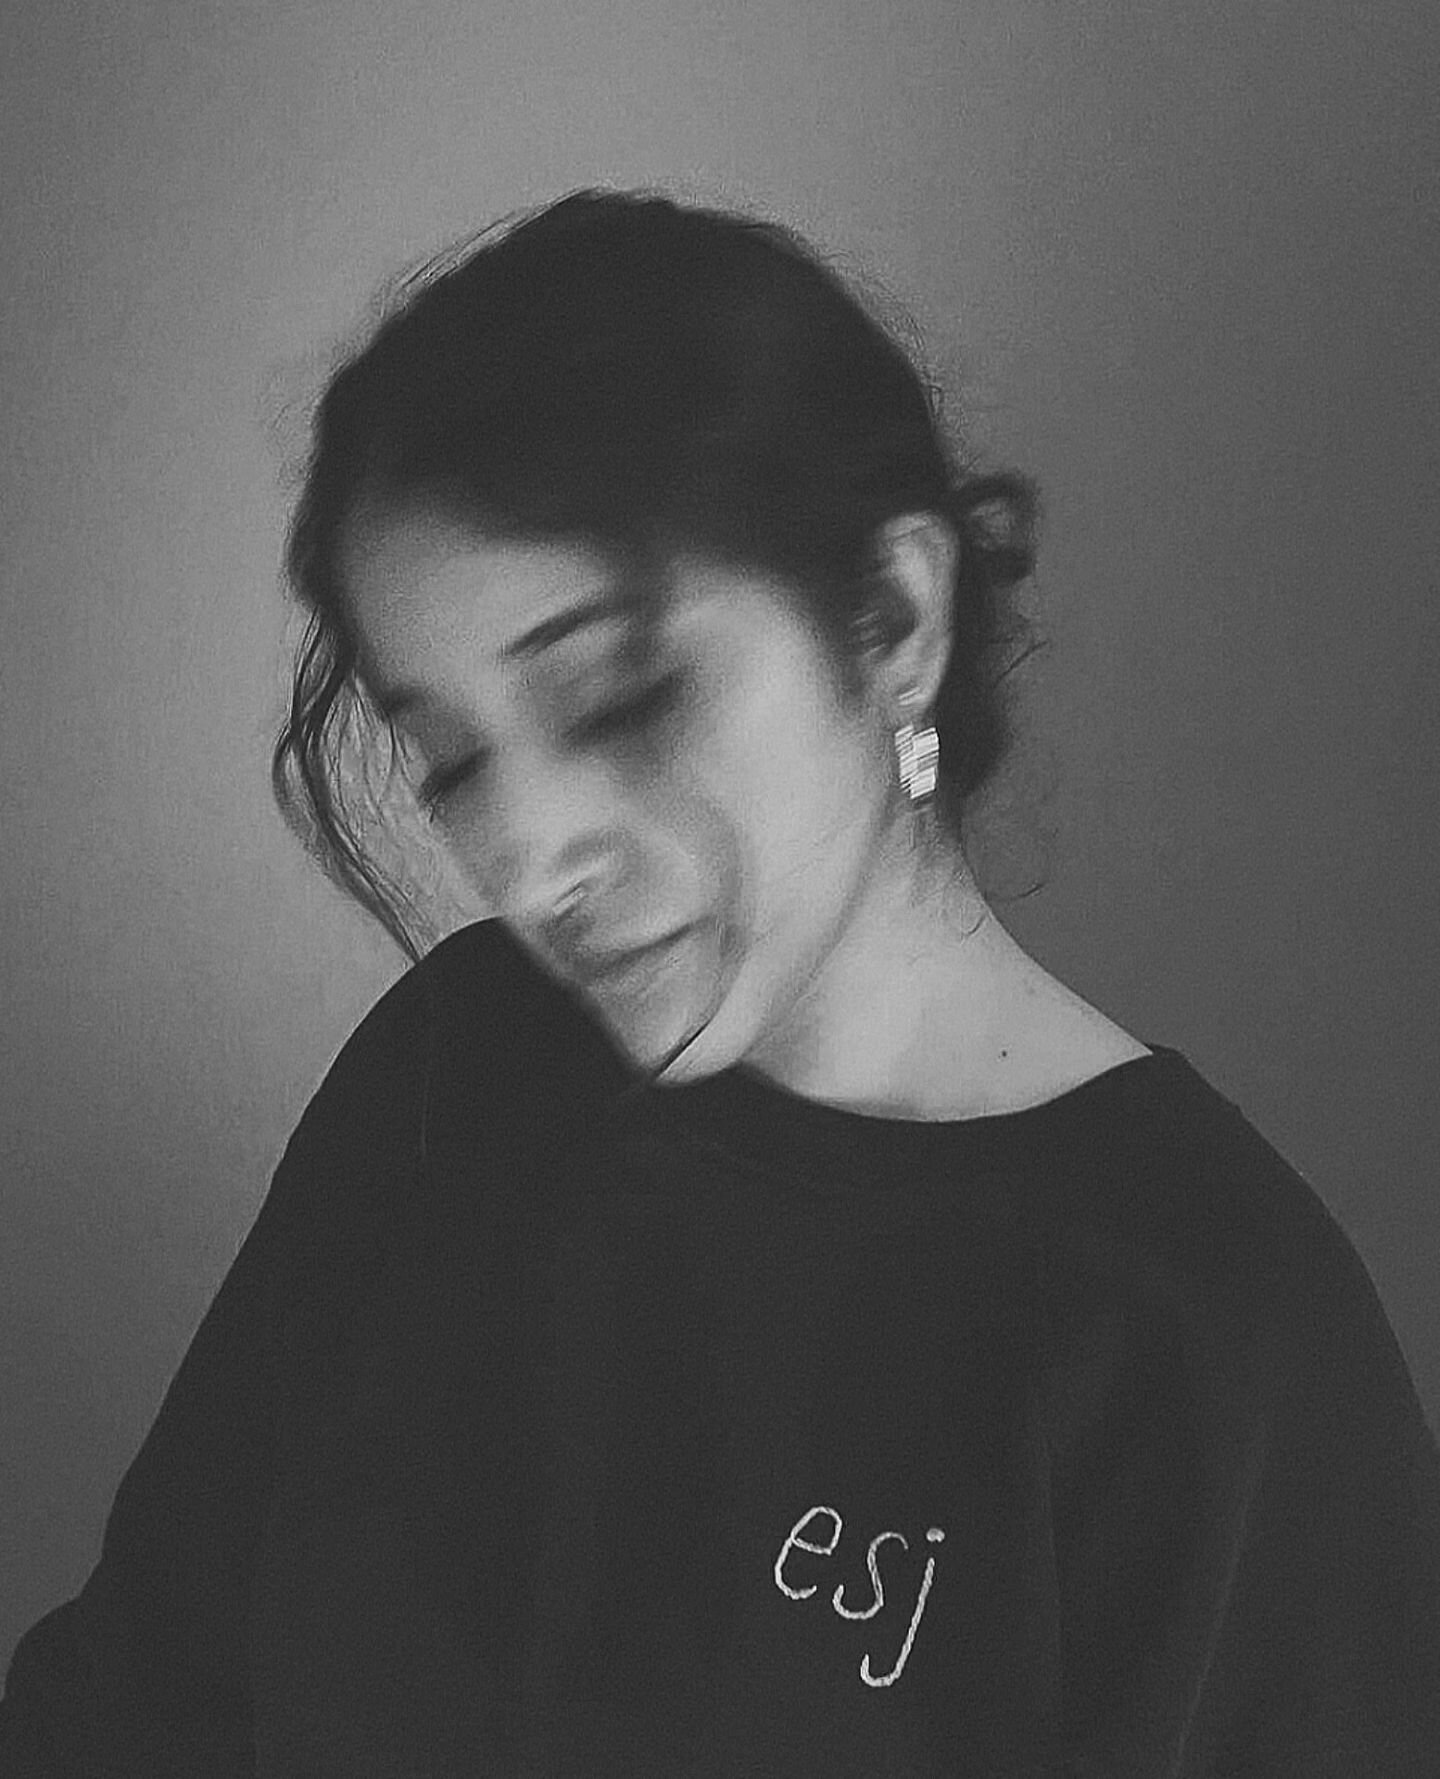 As soon as it cools down enough, you'll find us back in our vintage, hand-embroidered ESJ sweatshirts by @greymoonvintage. From our 2020 'Cozy Collection' a collaboration between ESJ &amp; @greymoonvintage, these one-of-a-kind sweatshirts sold out in